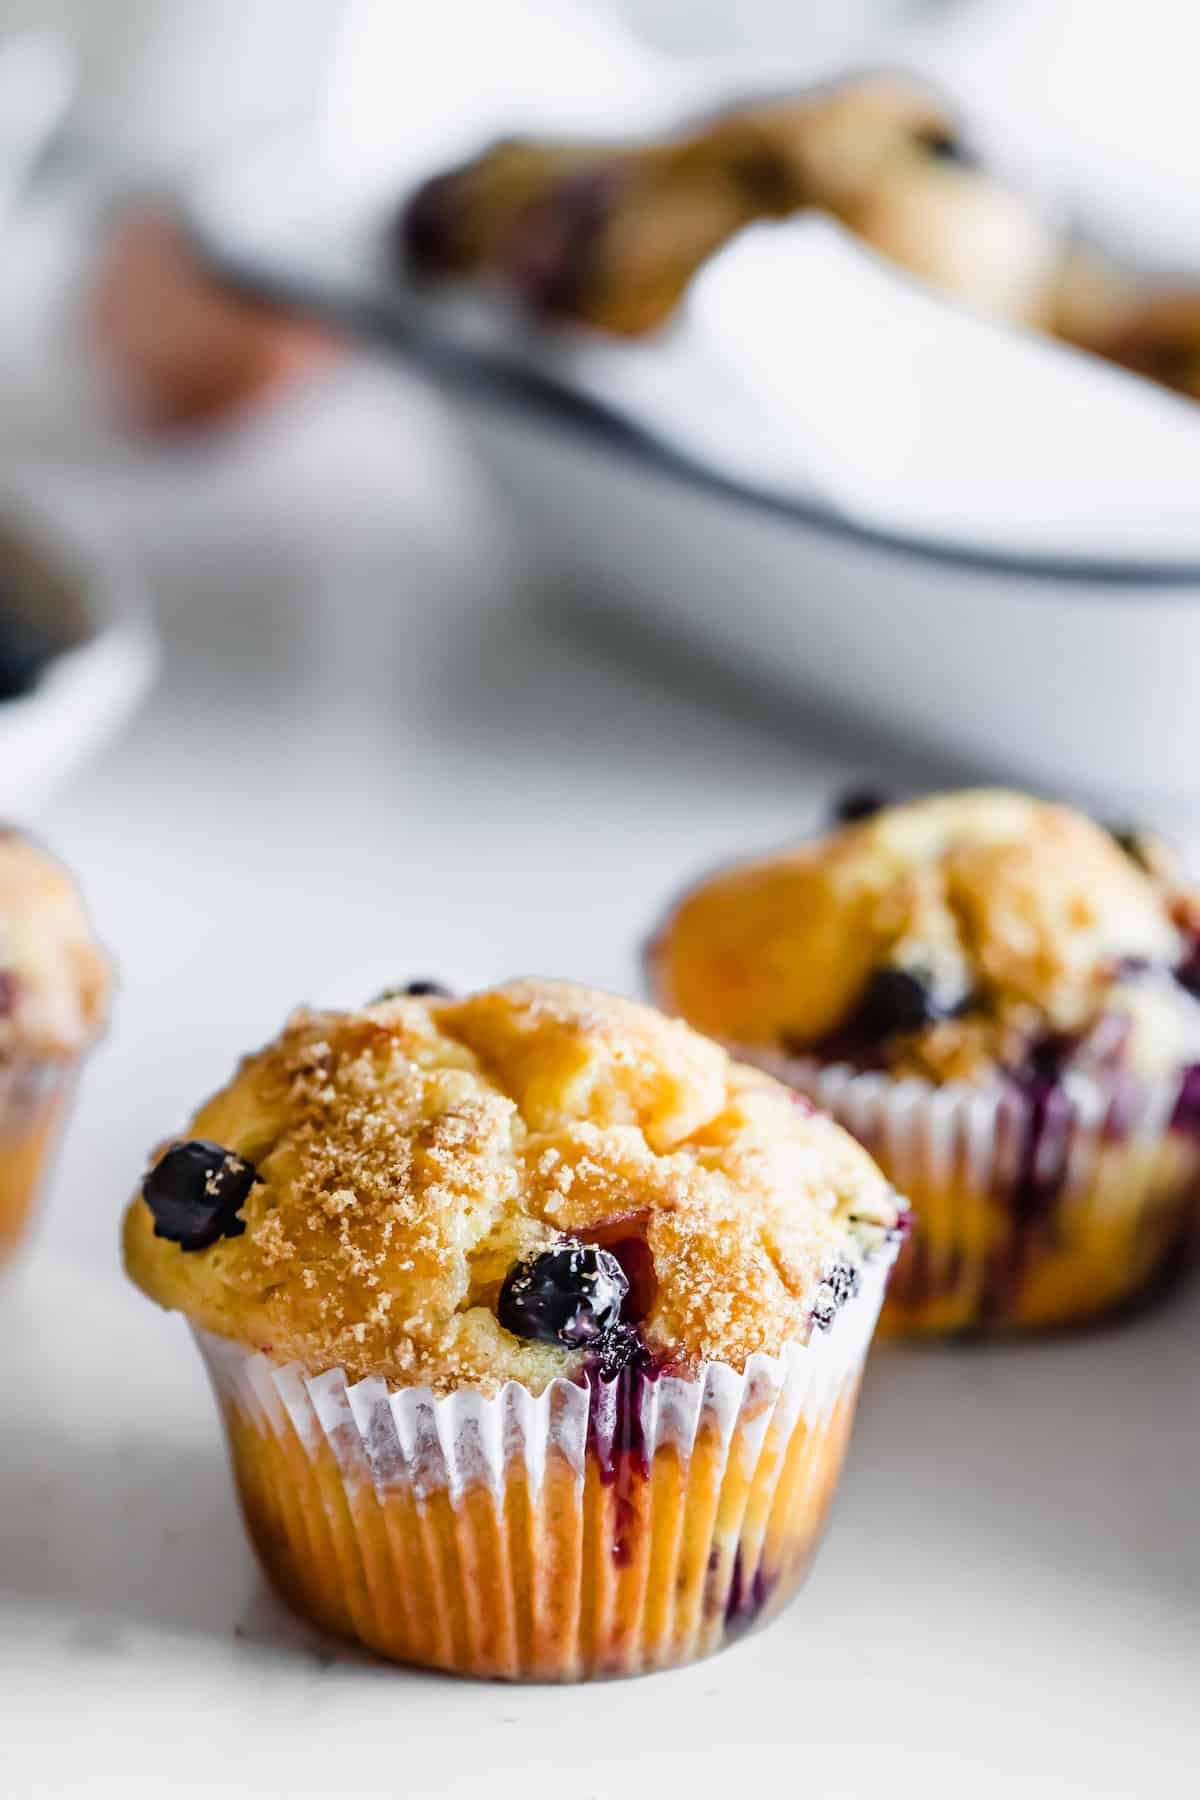 A Single Blueberry Muffin on a White Surface with More Muffins in the Background